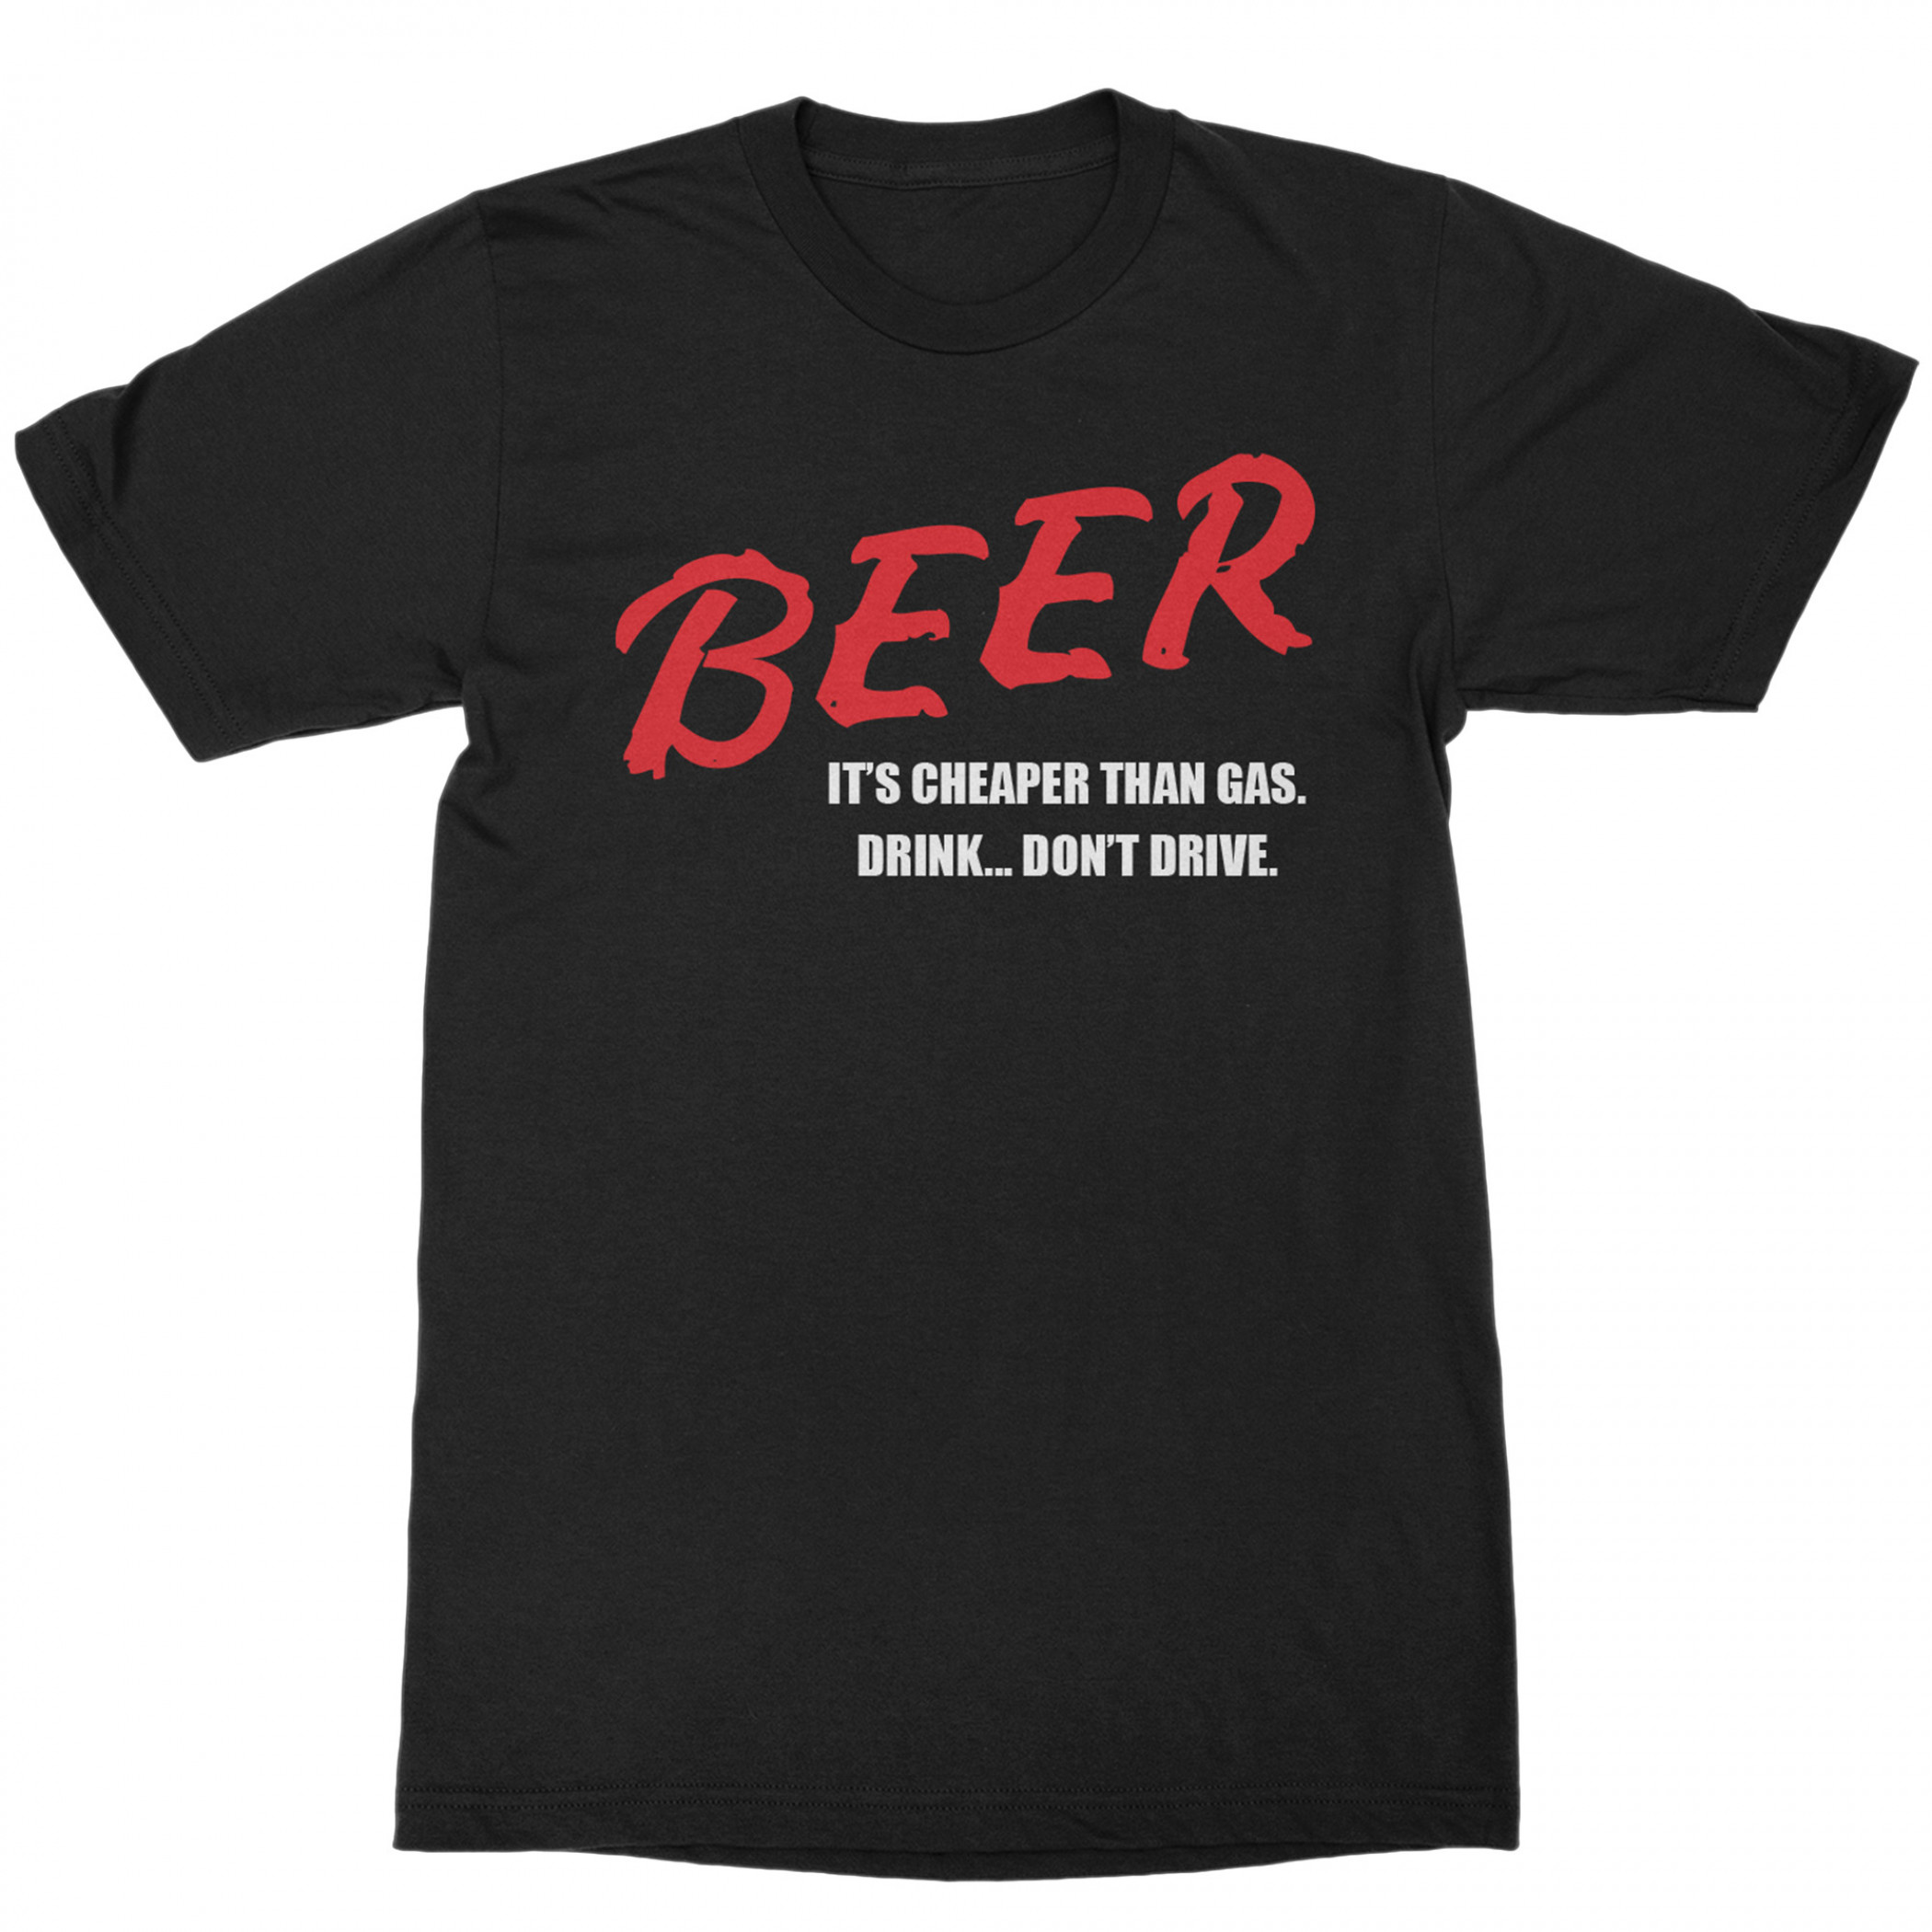 Beer It's Cheaper Than Gas Drink...Don't Drive Graphic T-Shirt | Brew ...